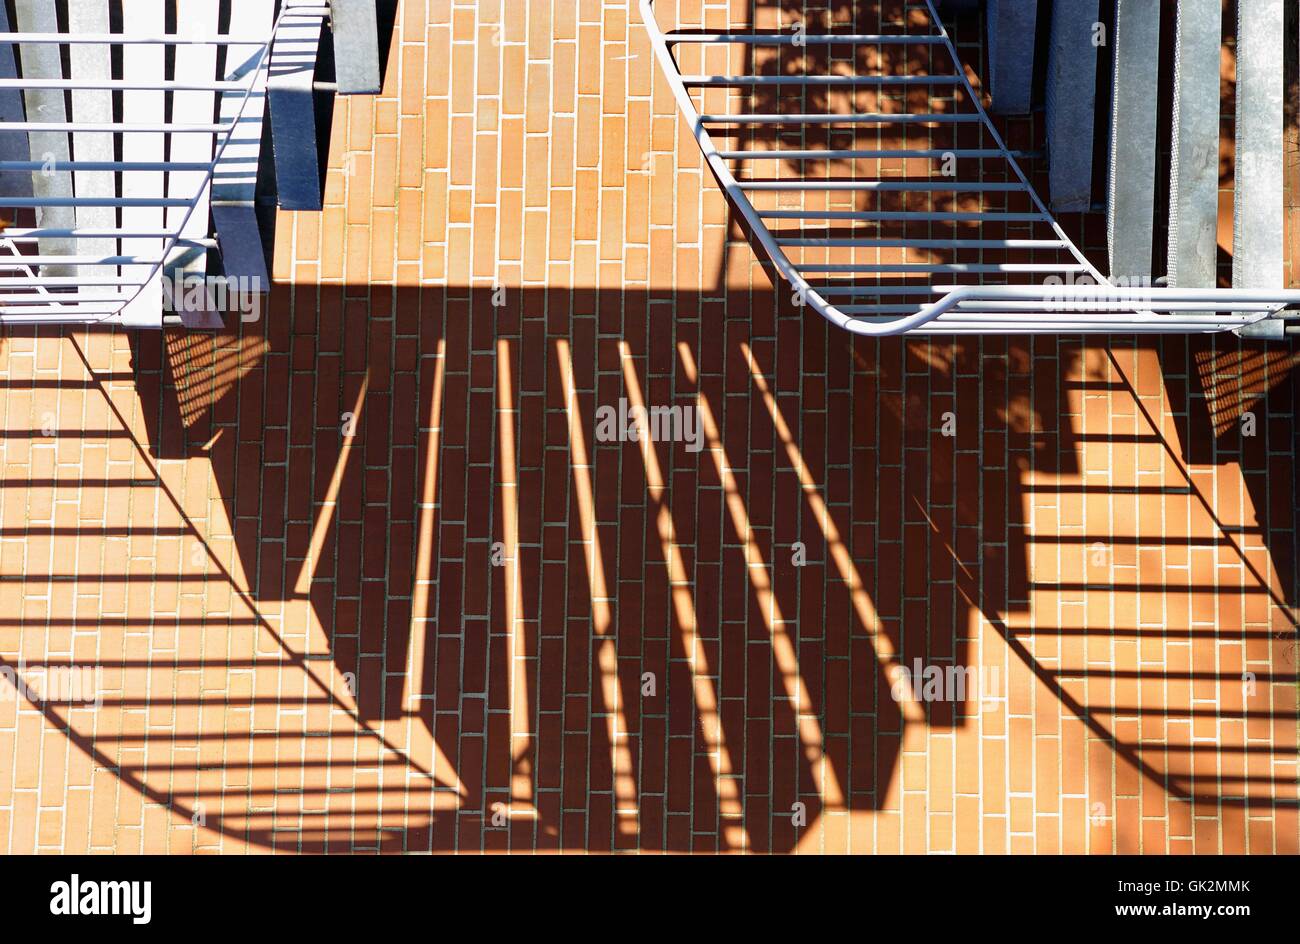 spiral staircase at the house with shadow Stock Photo